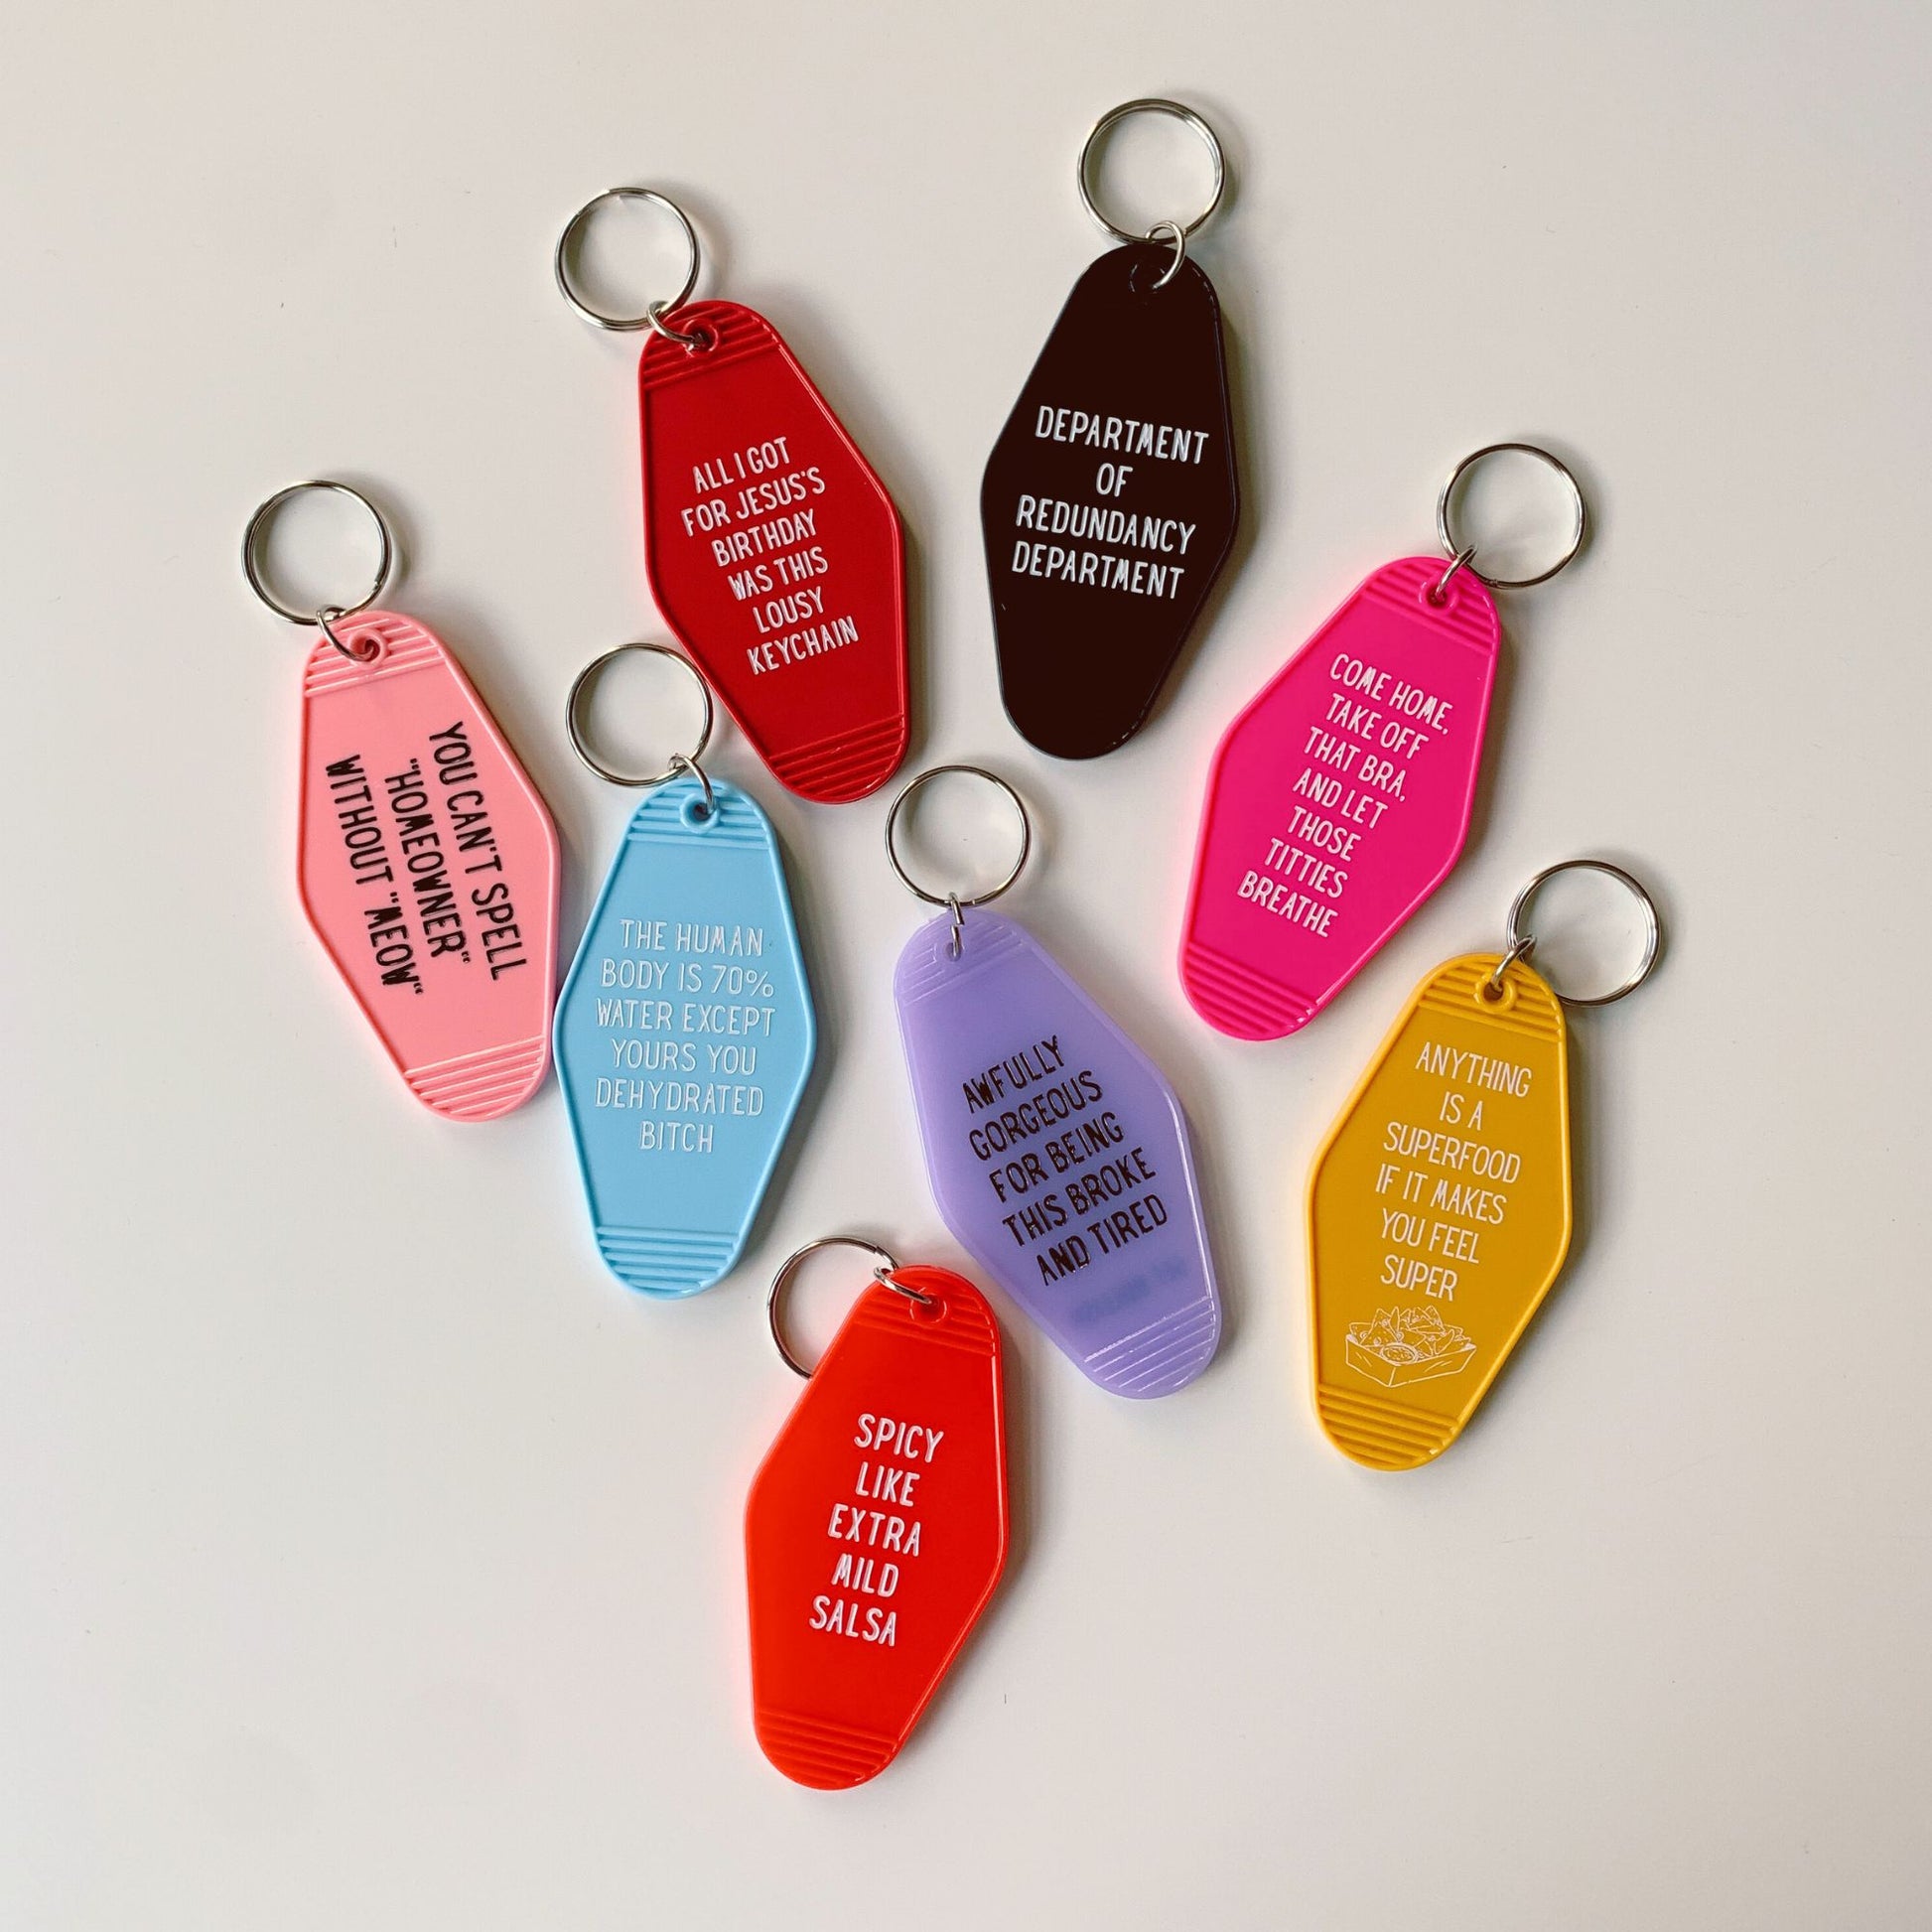 All I Got For Jesus's Birthday Christmas Motel Style Keychain in Red